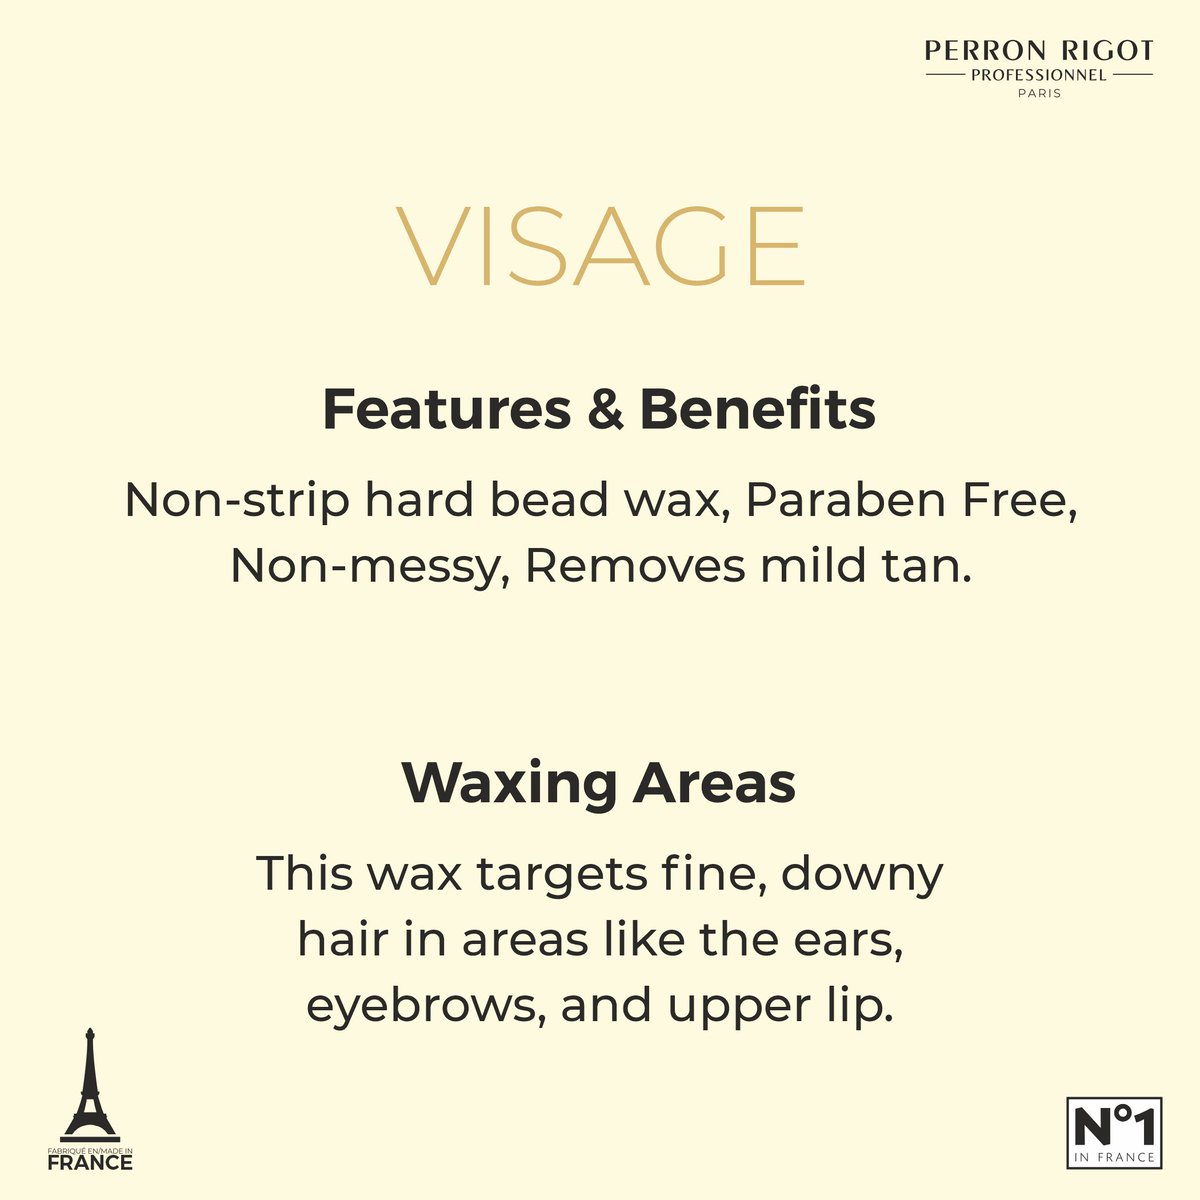 Who says facial waxing has to be a pain? Not with Cirepil Visage, it doesn't! Embrace the smoothness, embrace the joy!

#perronrigot #perronrigotwax #cirepilbyperronrigot #perronrigotprofessionnel #perronrigotwaxing #facewax